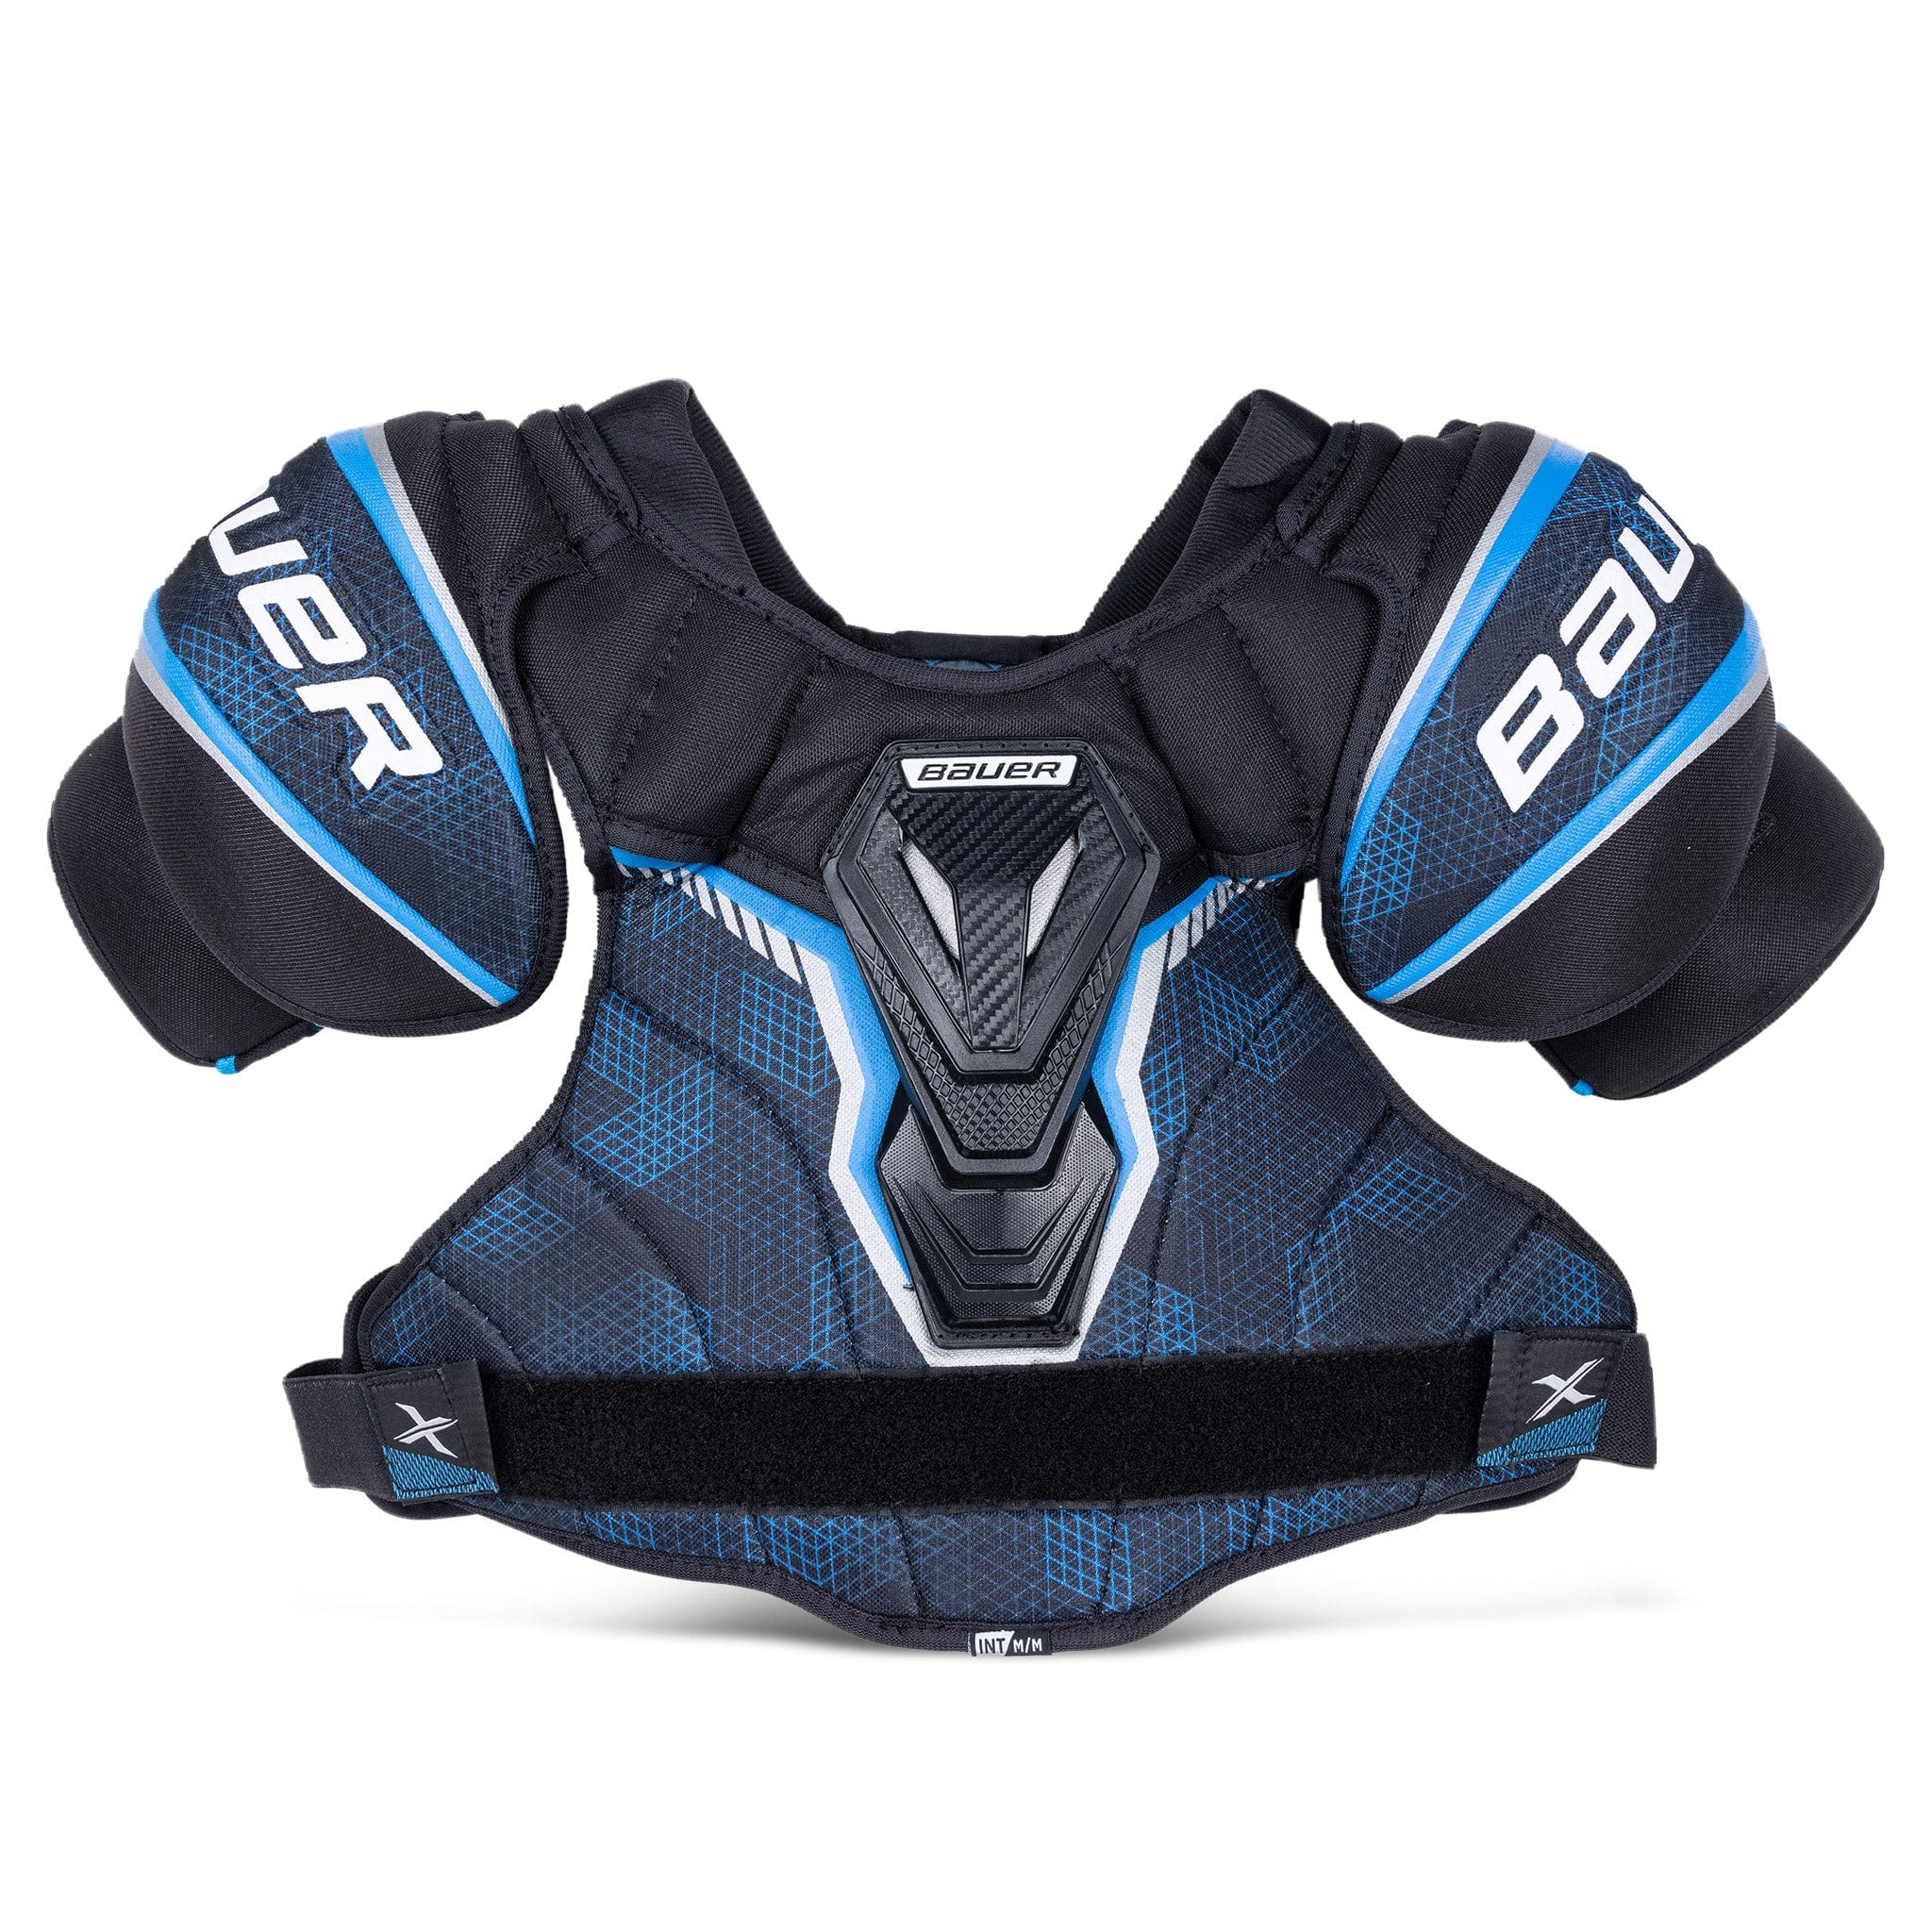 How to Fit Hockey Shoulder Pads